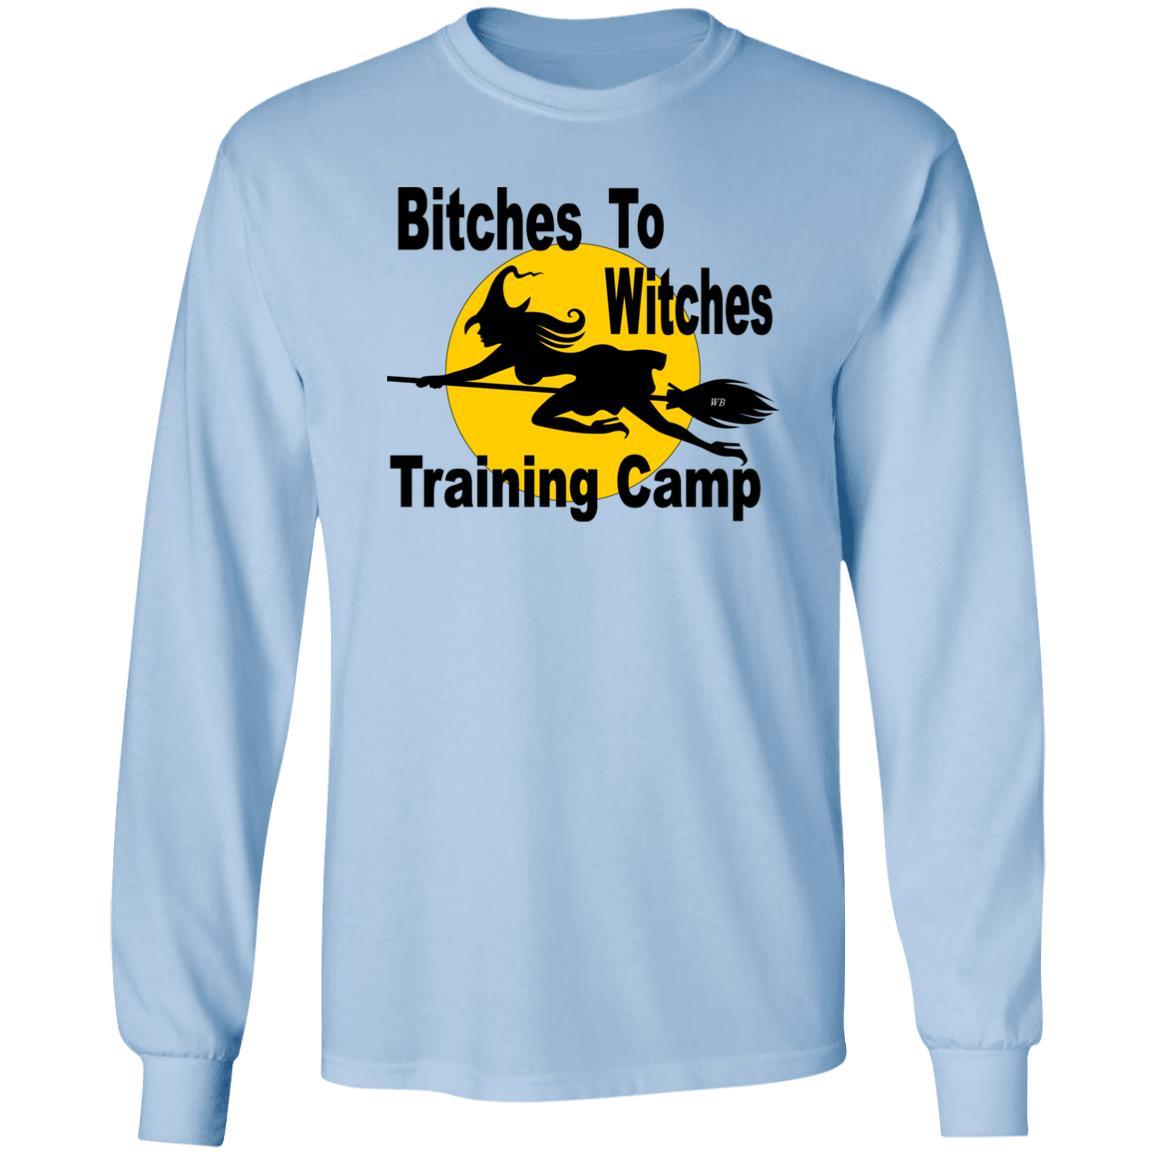 T-Shirts Light Blue / S WineyBitches.Co "Bitches To Witches Training Camp" LS Ultra Cotton T-Shirt WineyBitchesCo